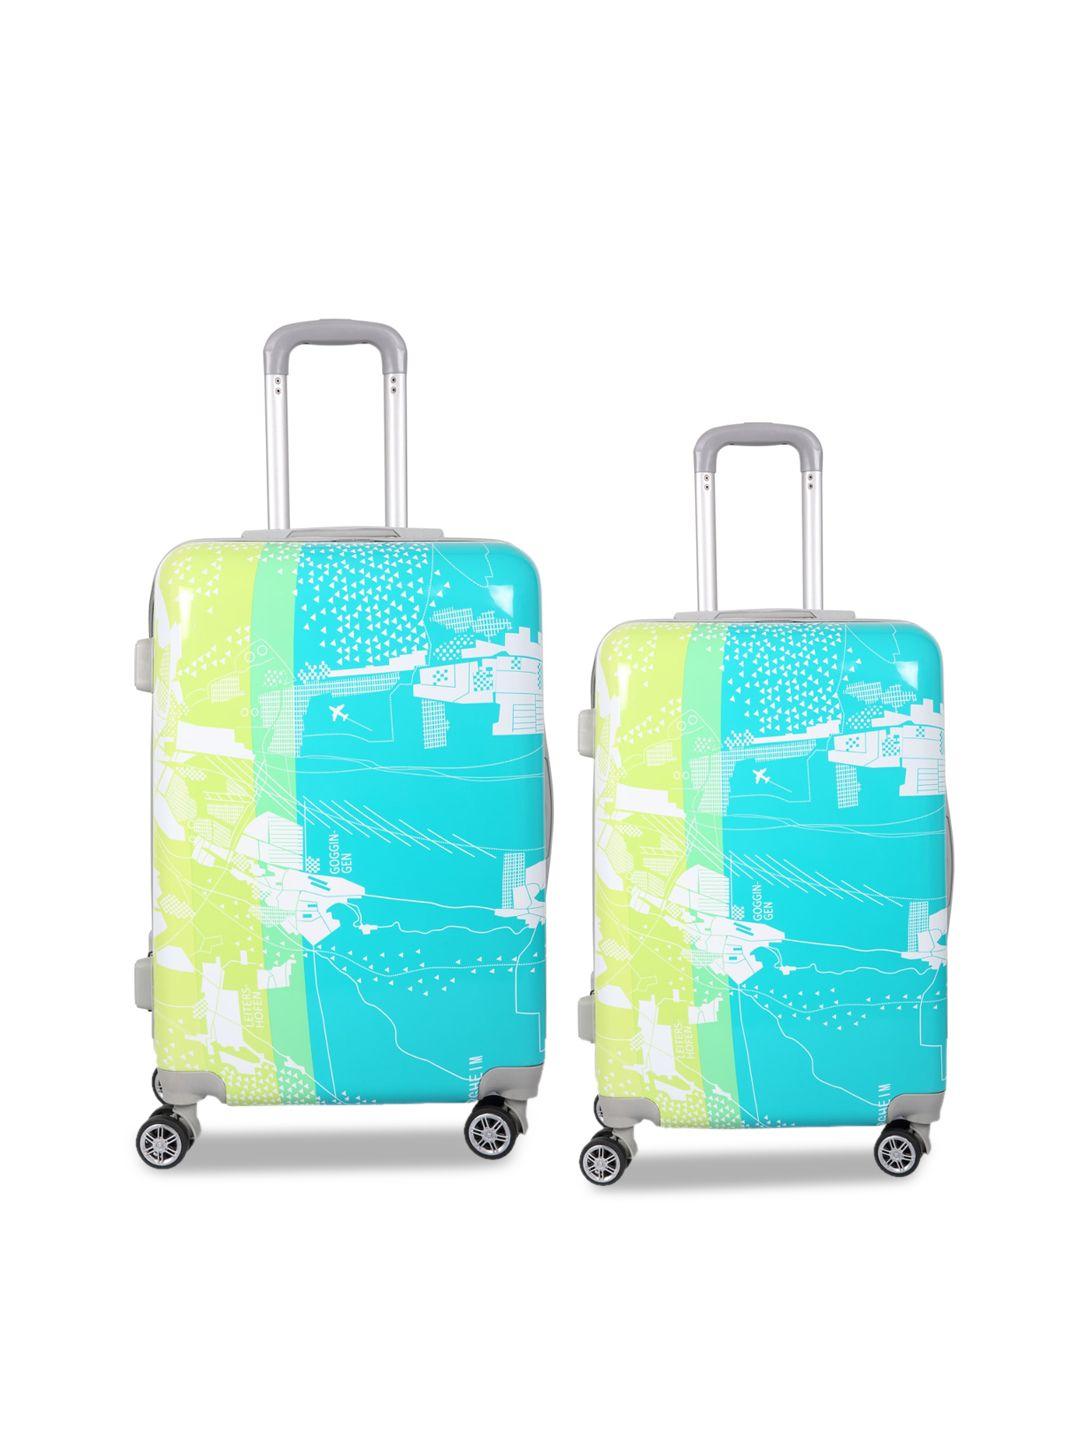 polo class unisex 2 pcs green hard luggage trolley bags